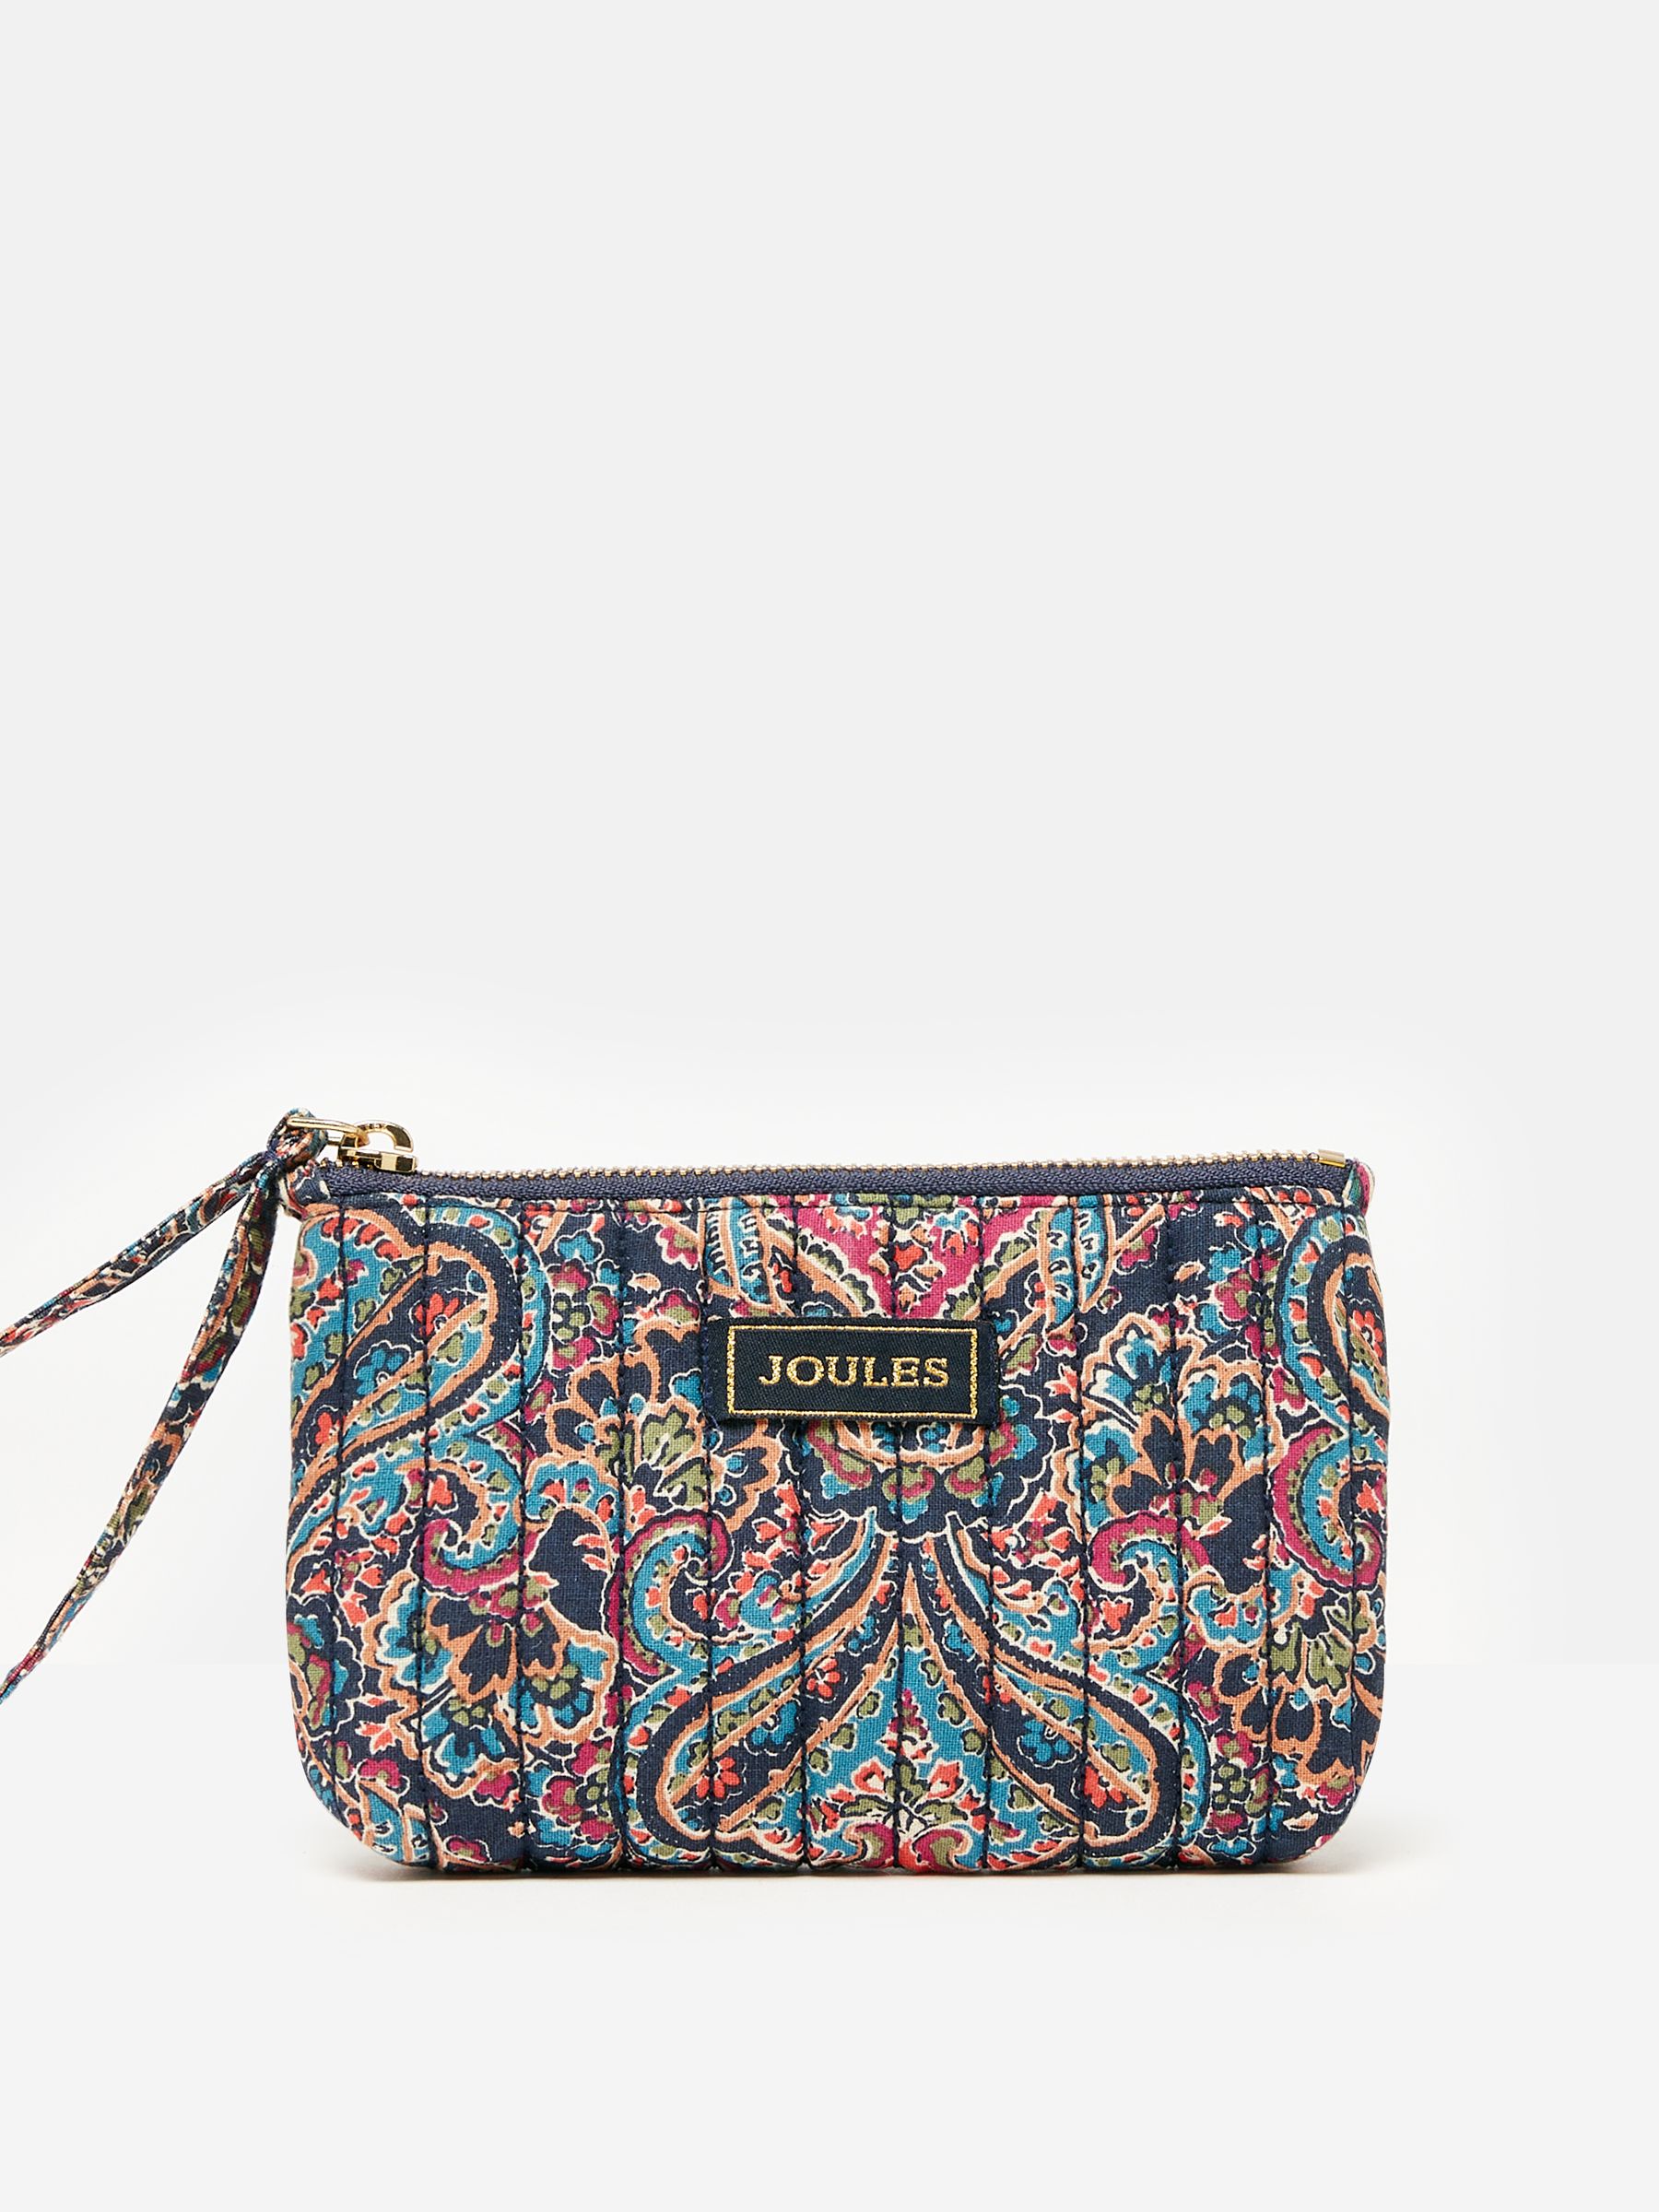 Buy Joules Daphne Wrist Purse from the Joules online shop